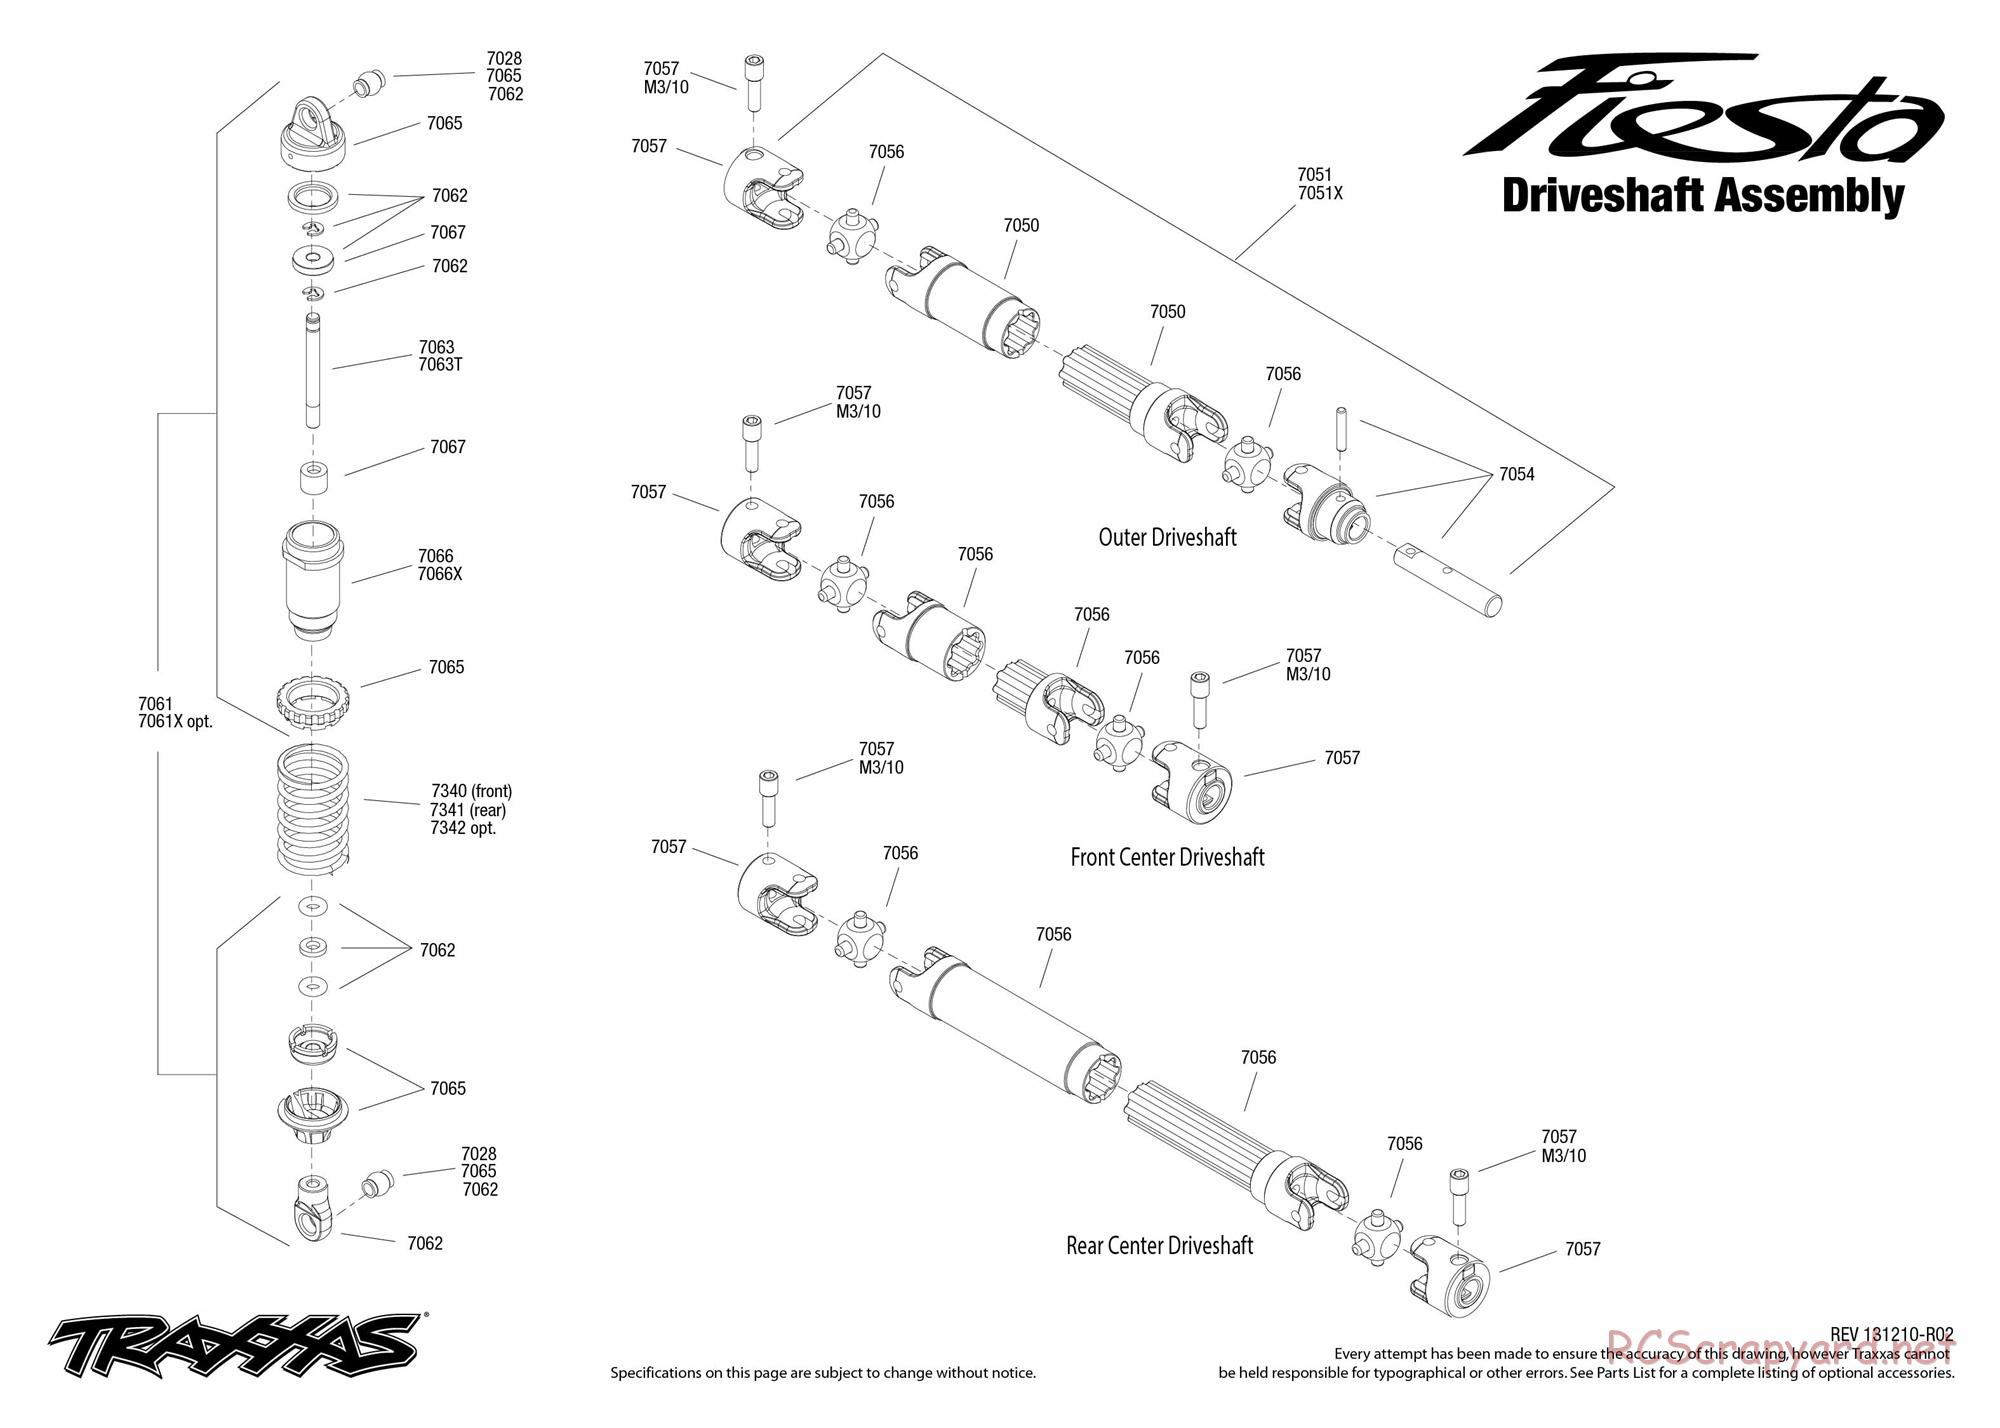 Traxxas - 1/16 Ford Fiesta (2011) - Exploded Views - Page 2